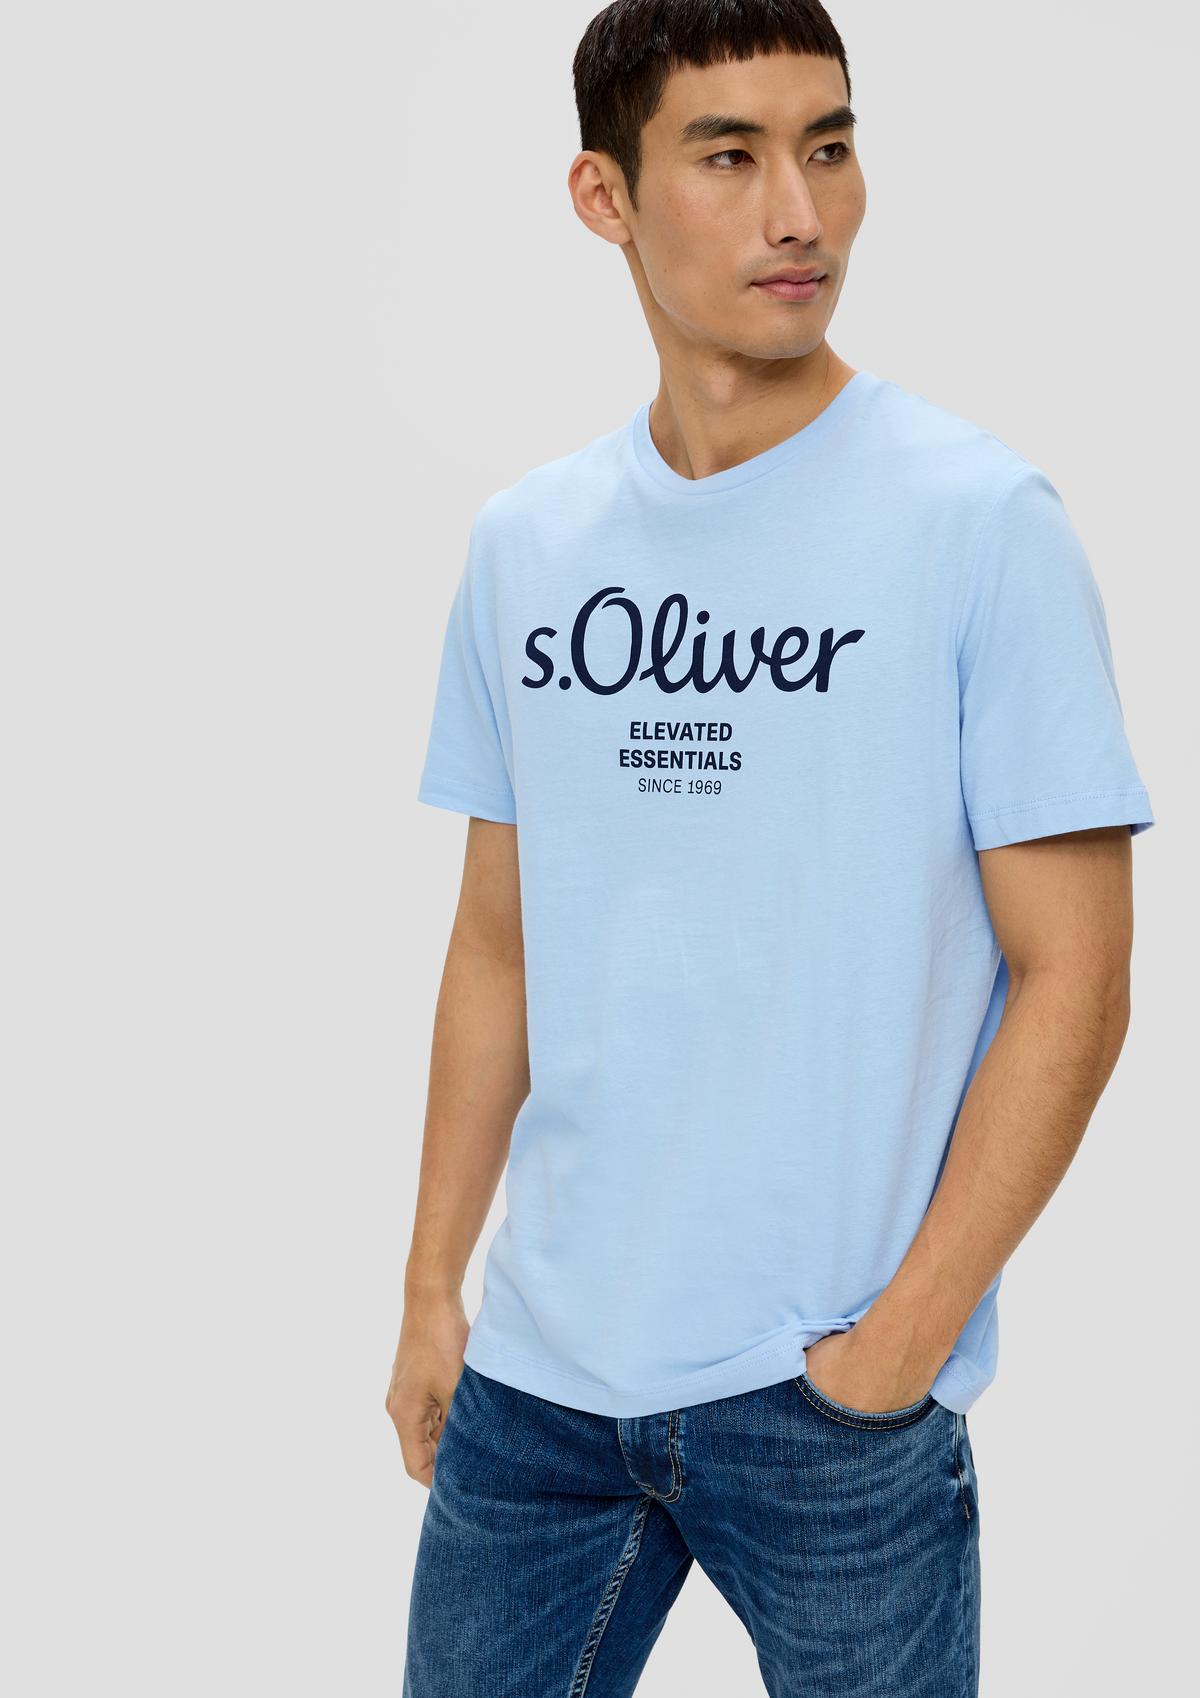 T-Shirts & Polos for Men